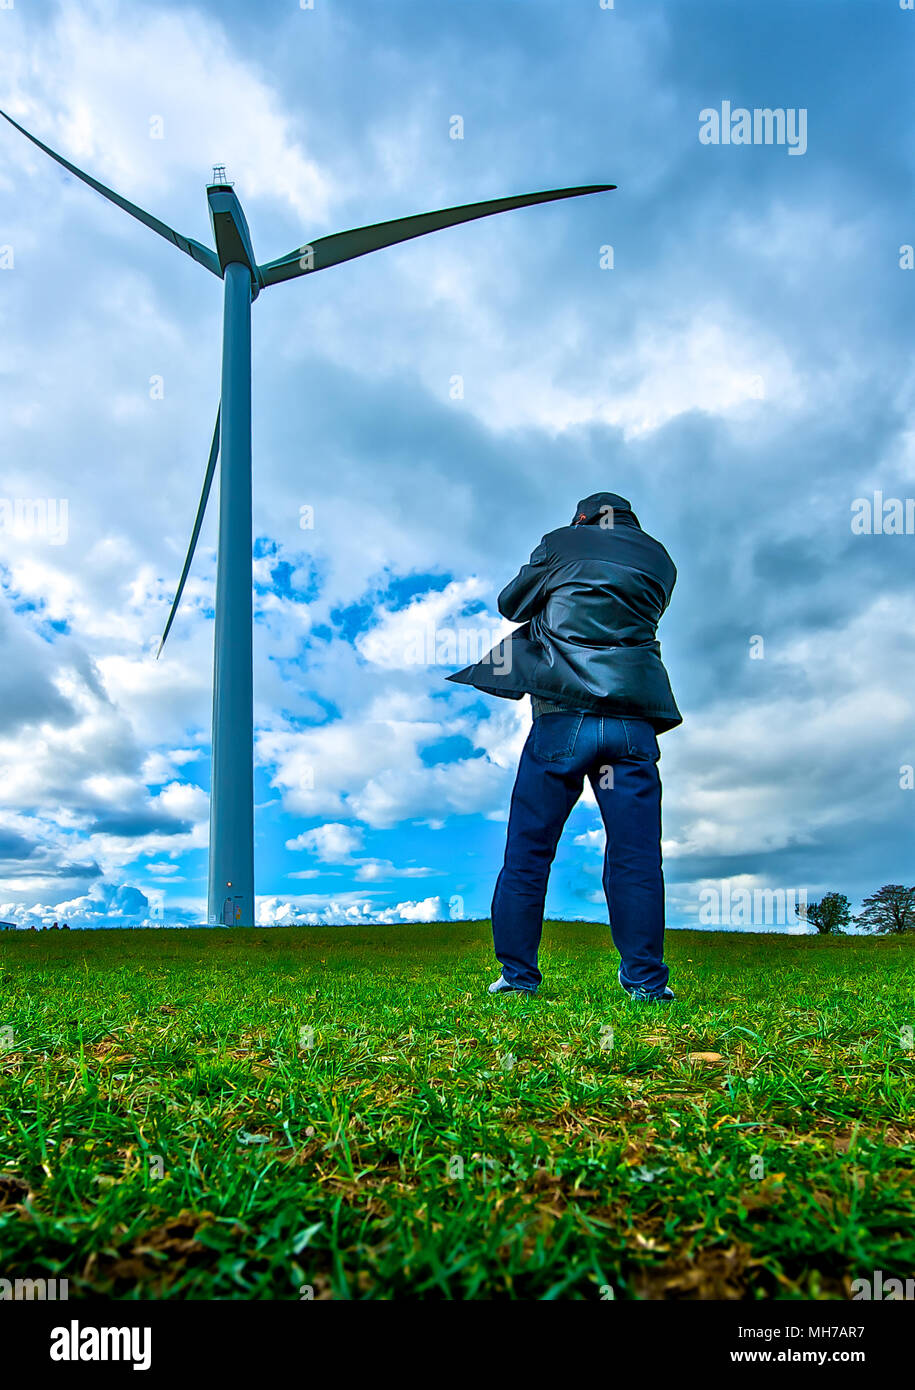 Standing firm for green energy. A man stands near a wind turbine. Stock Photo